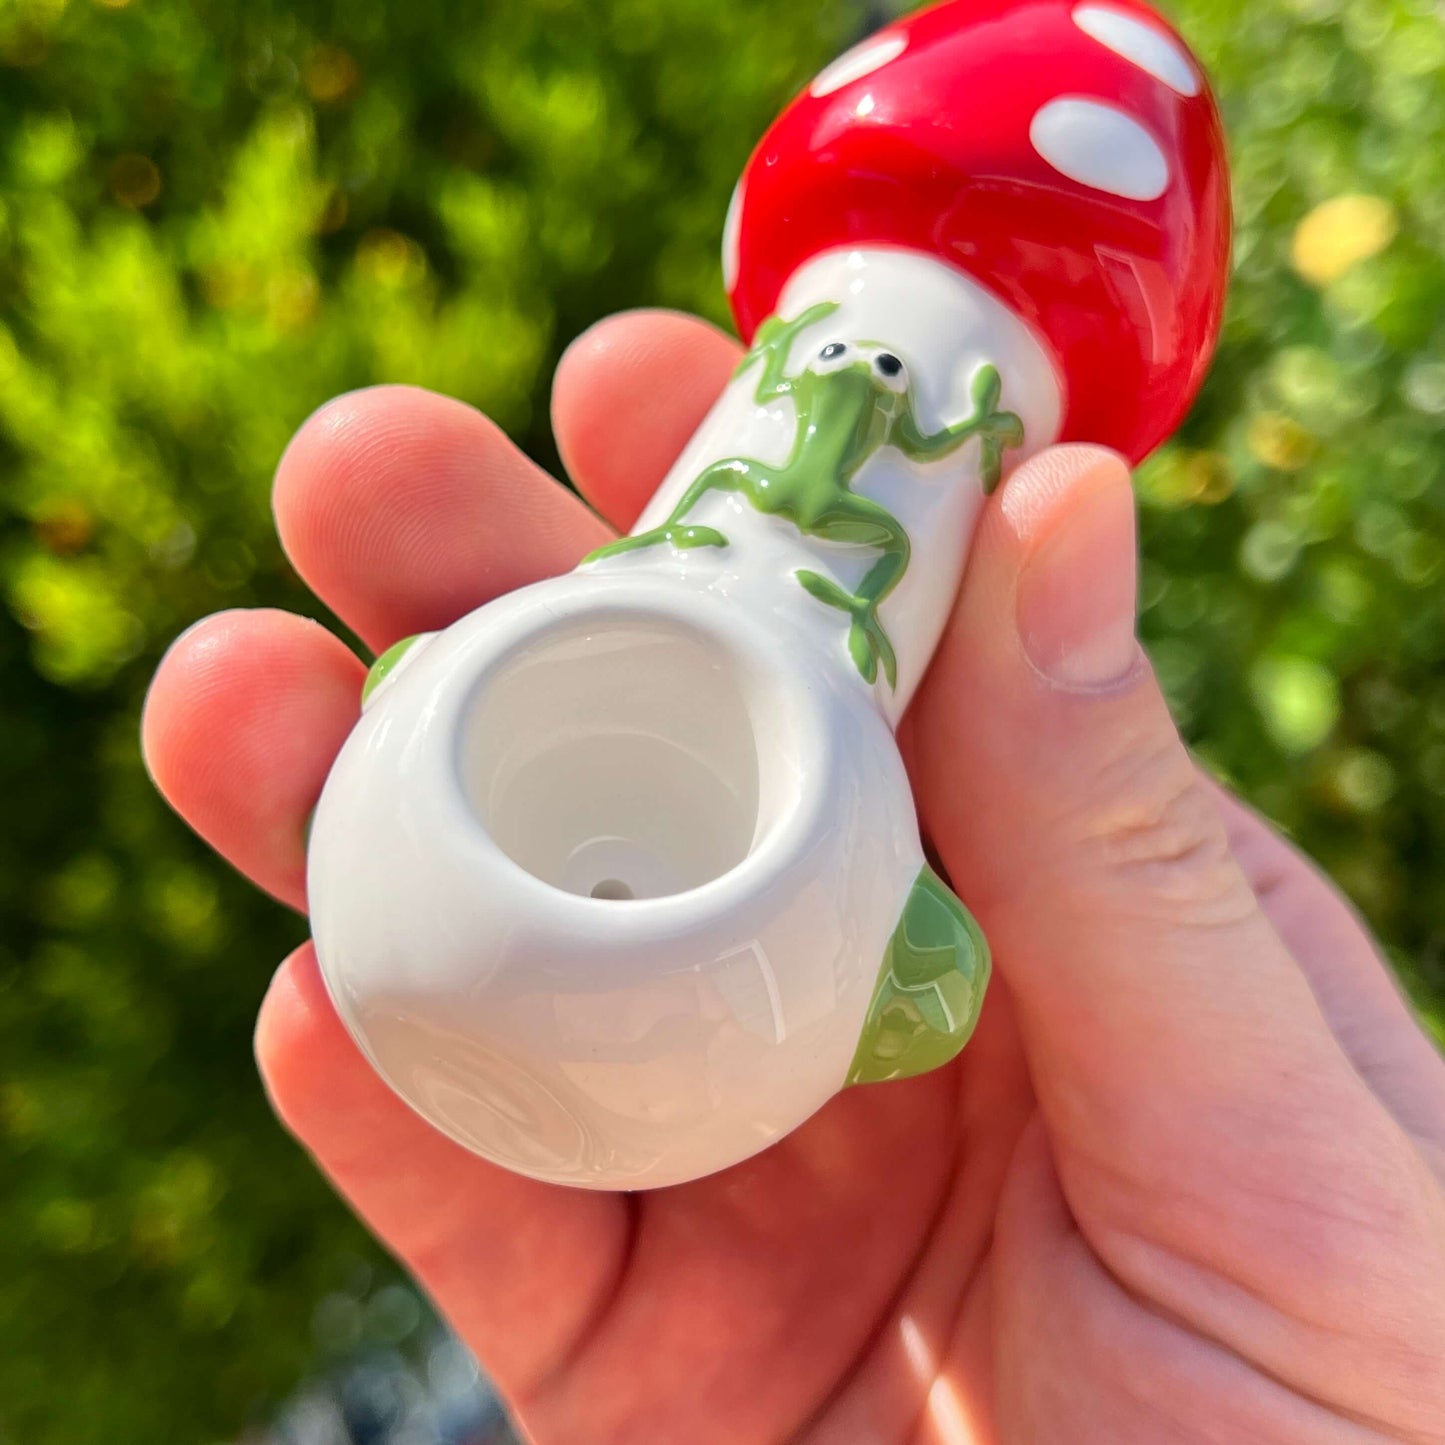 mushroom pipe with frog